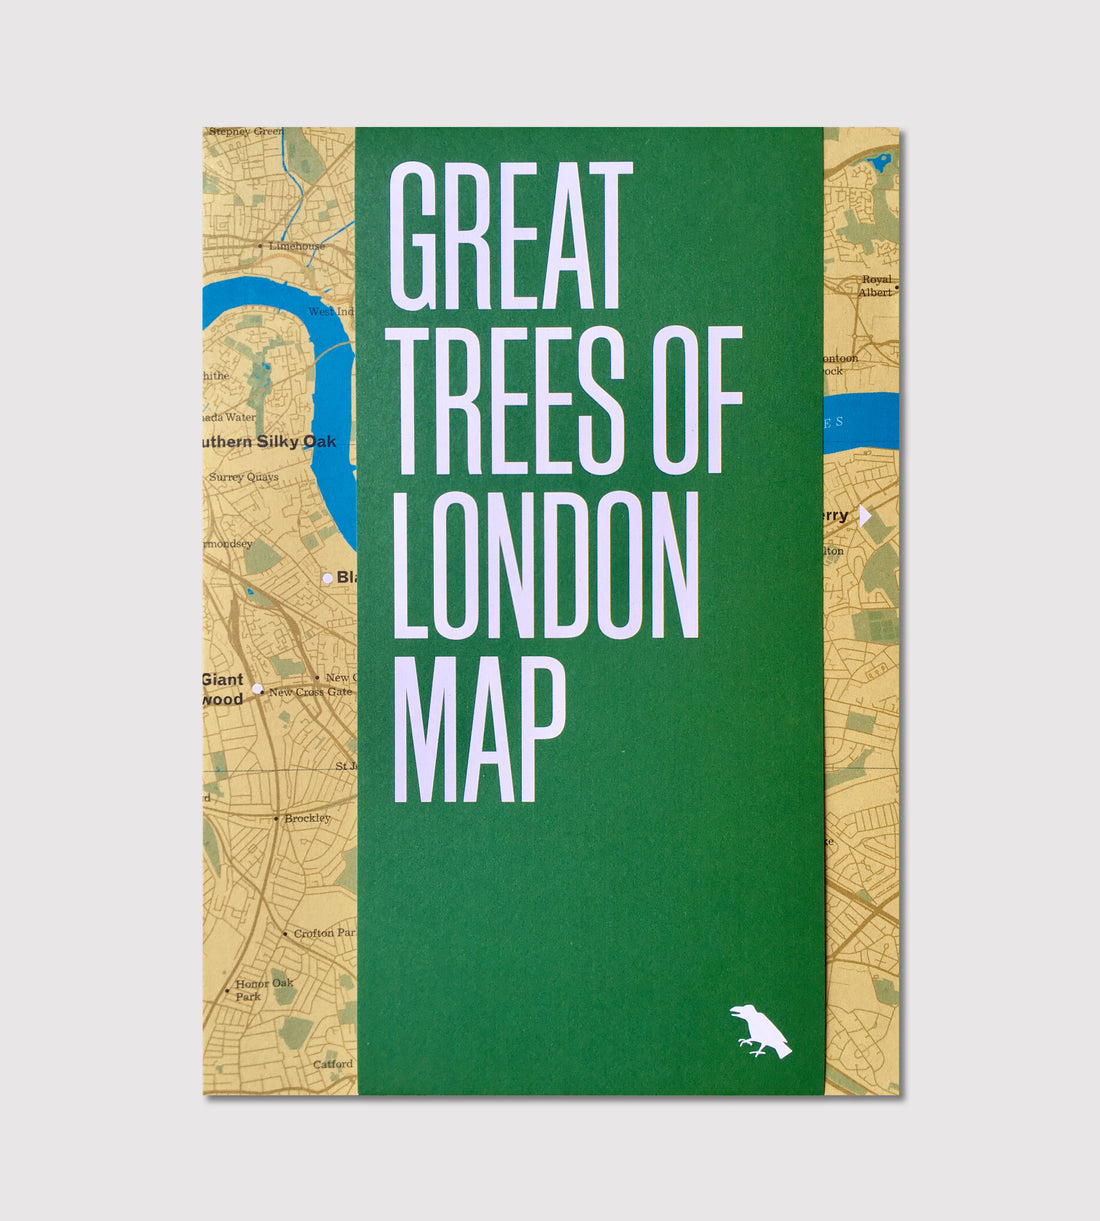 Introducing our new series of tree maps